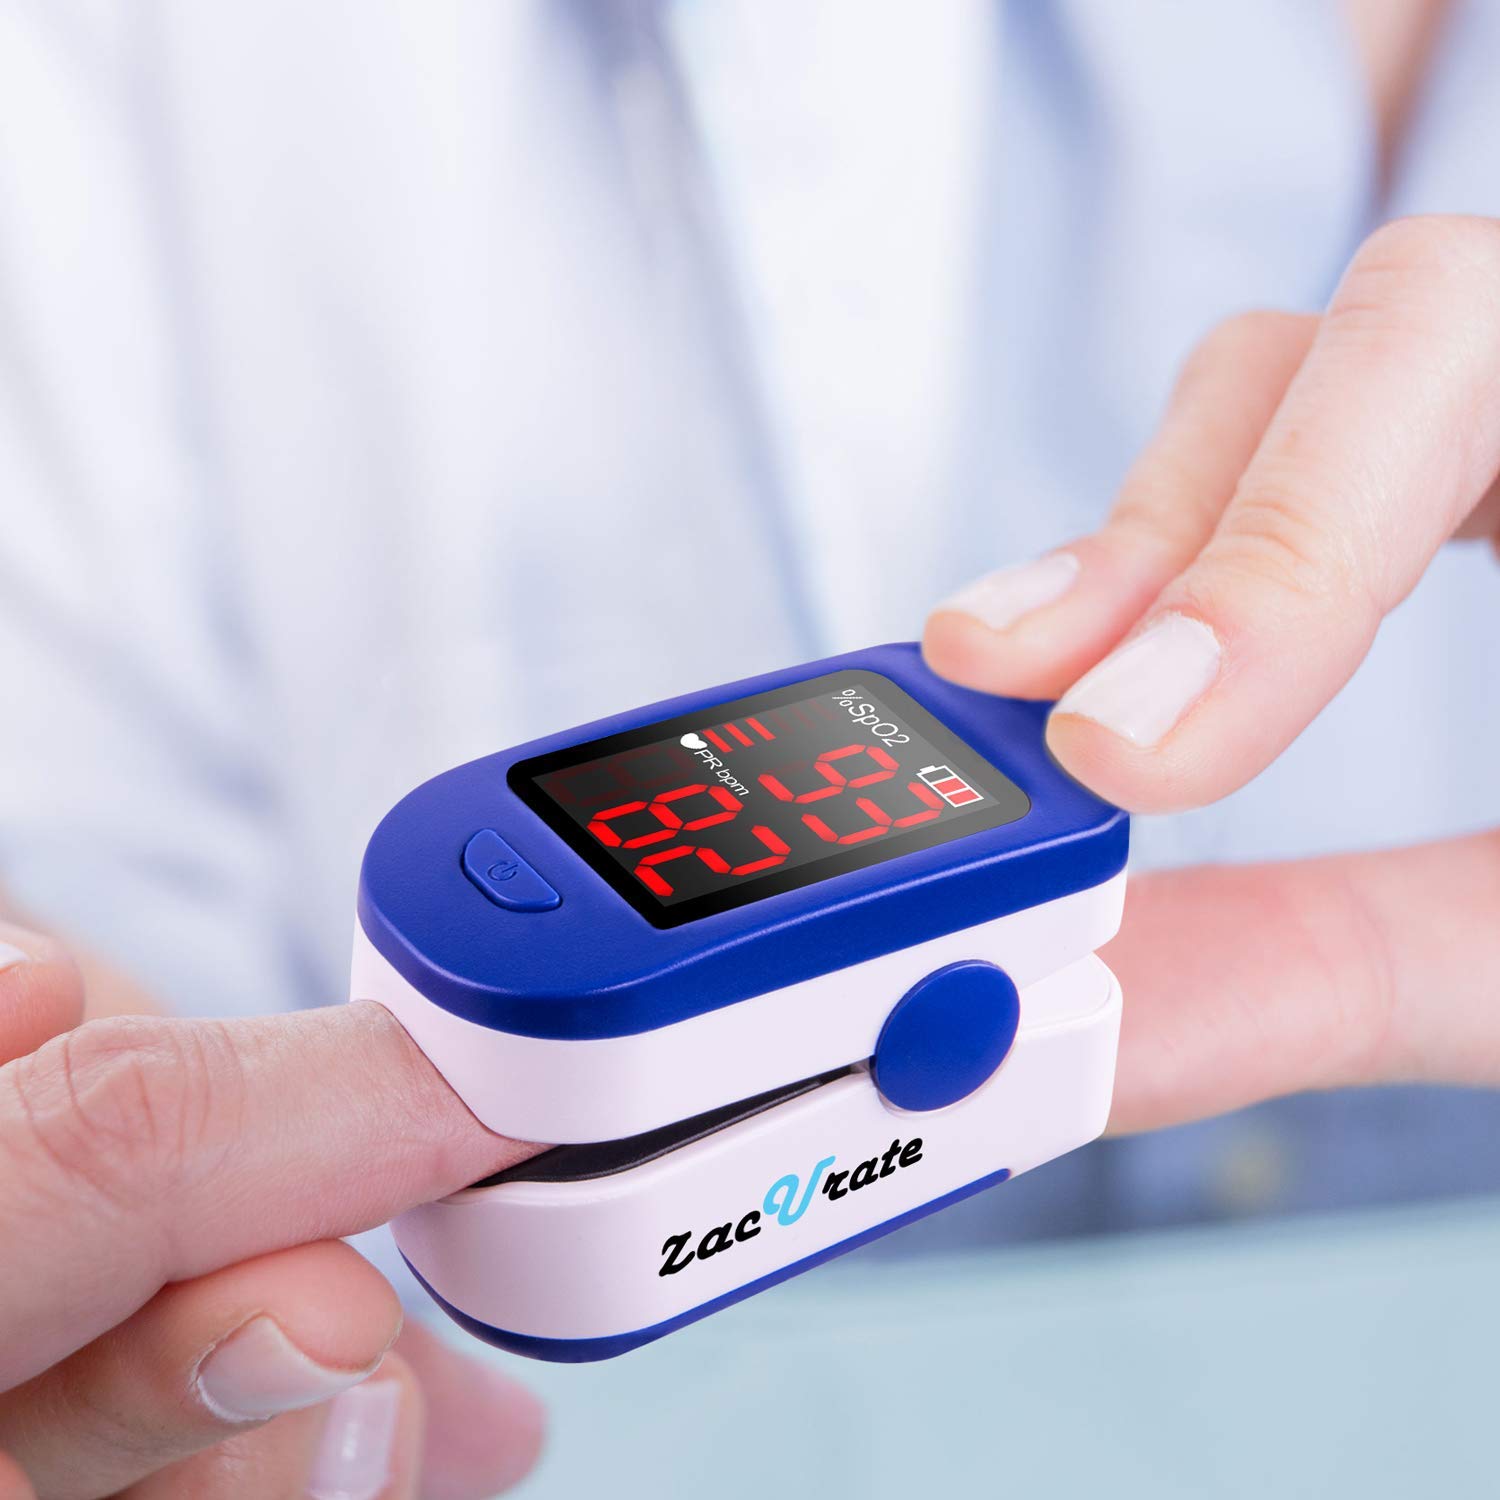  Zacurate 500BL Series Pulse Oximeter being used on a finger 